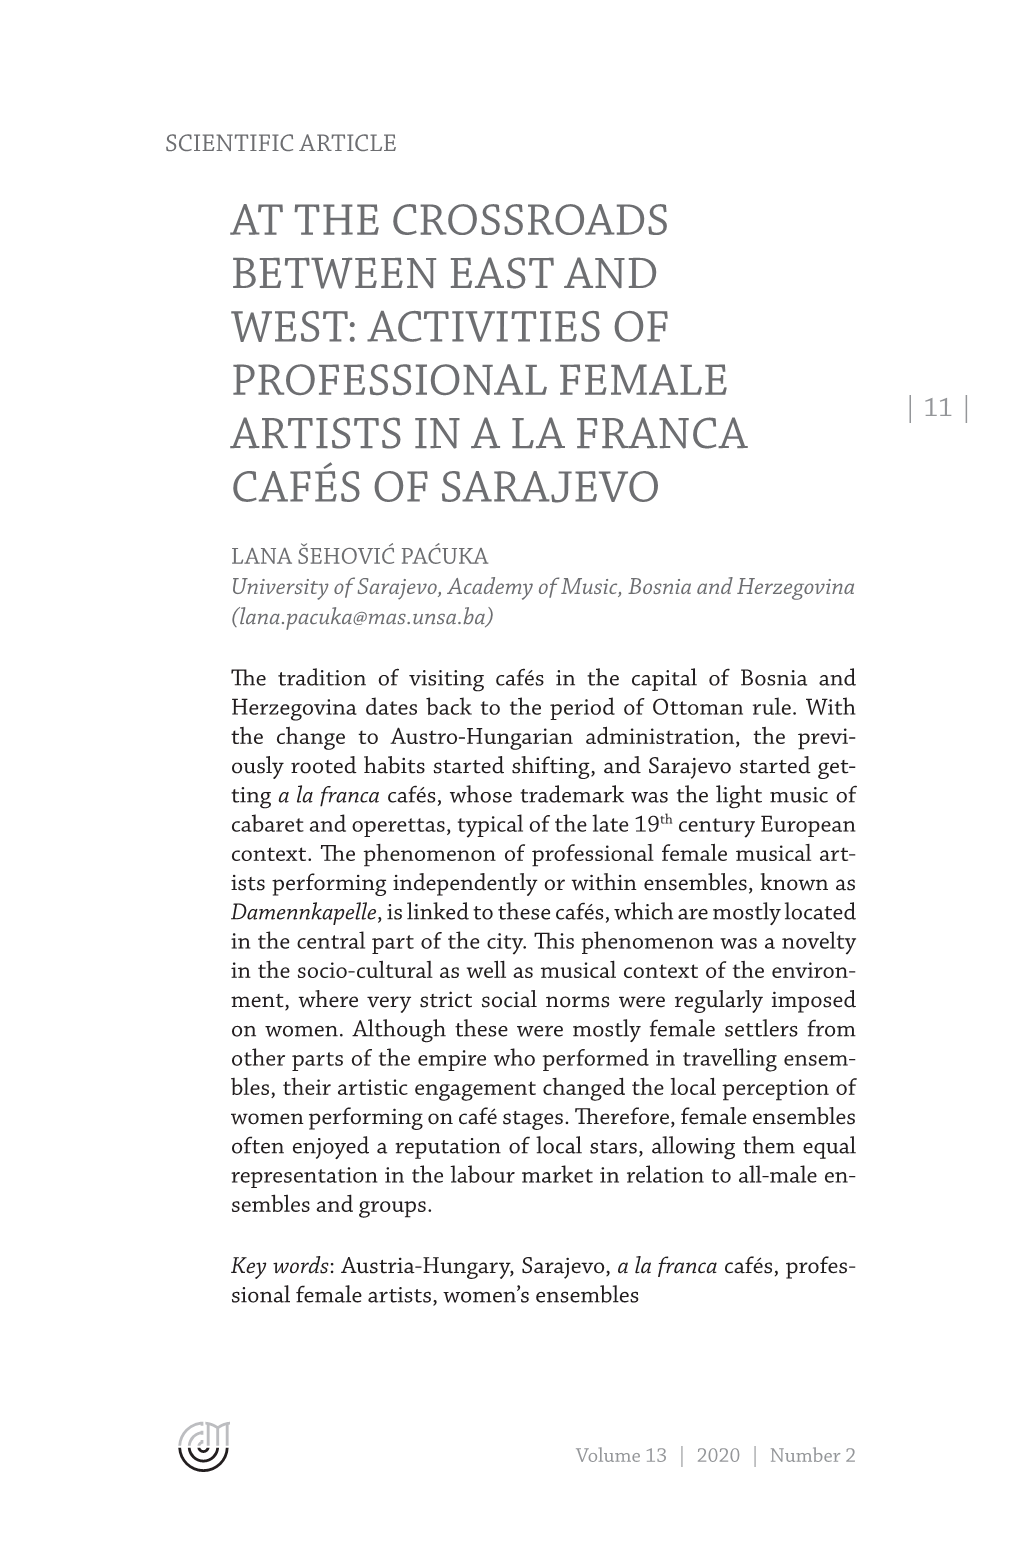 Activities of Professional Female Artists in a La